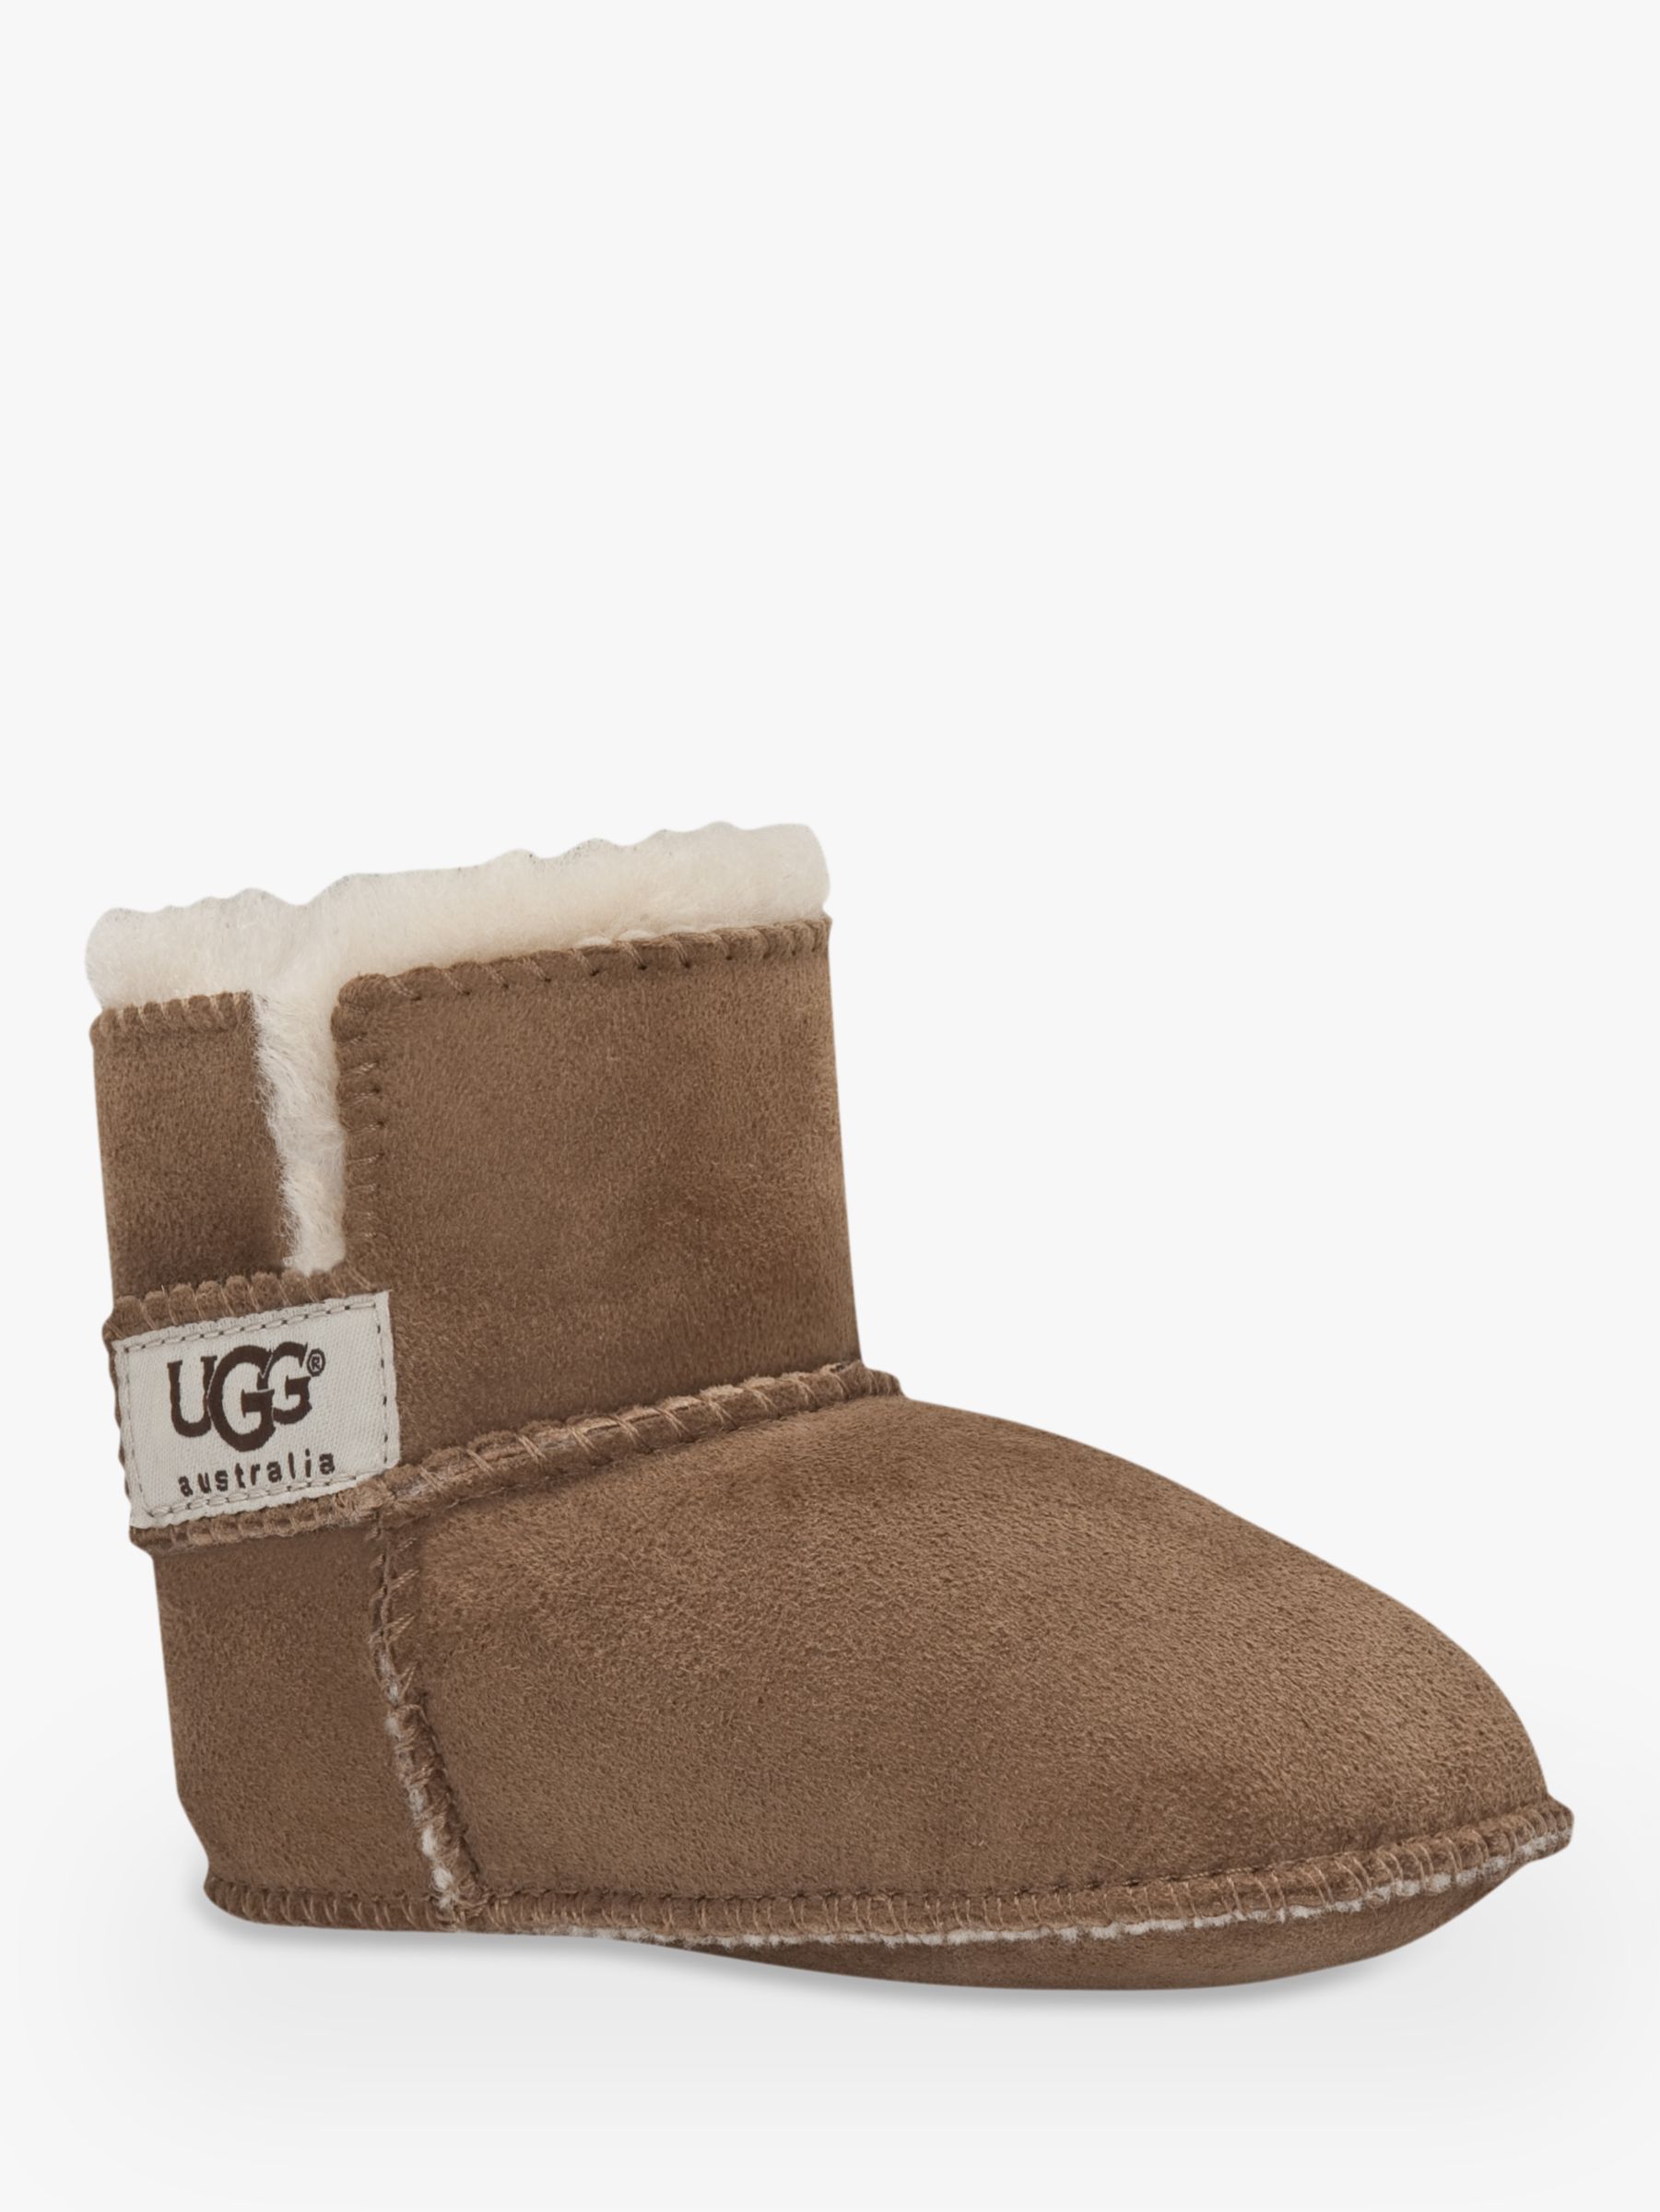 baby uggs 1 year old